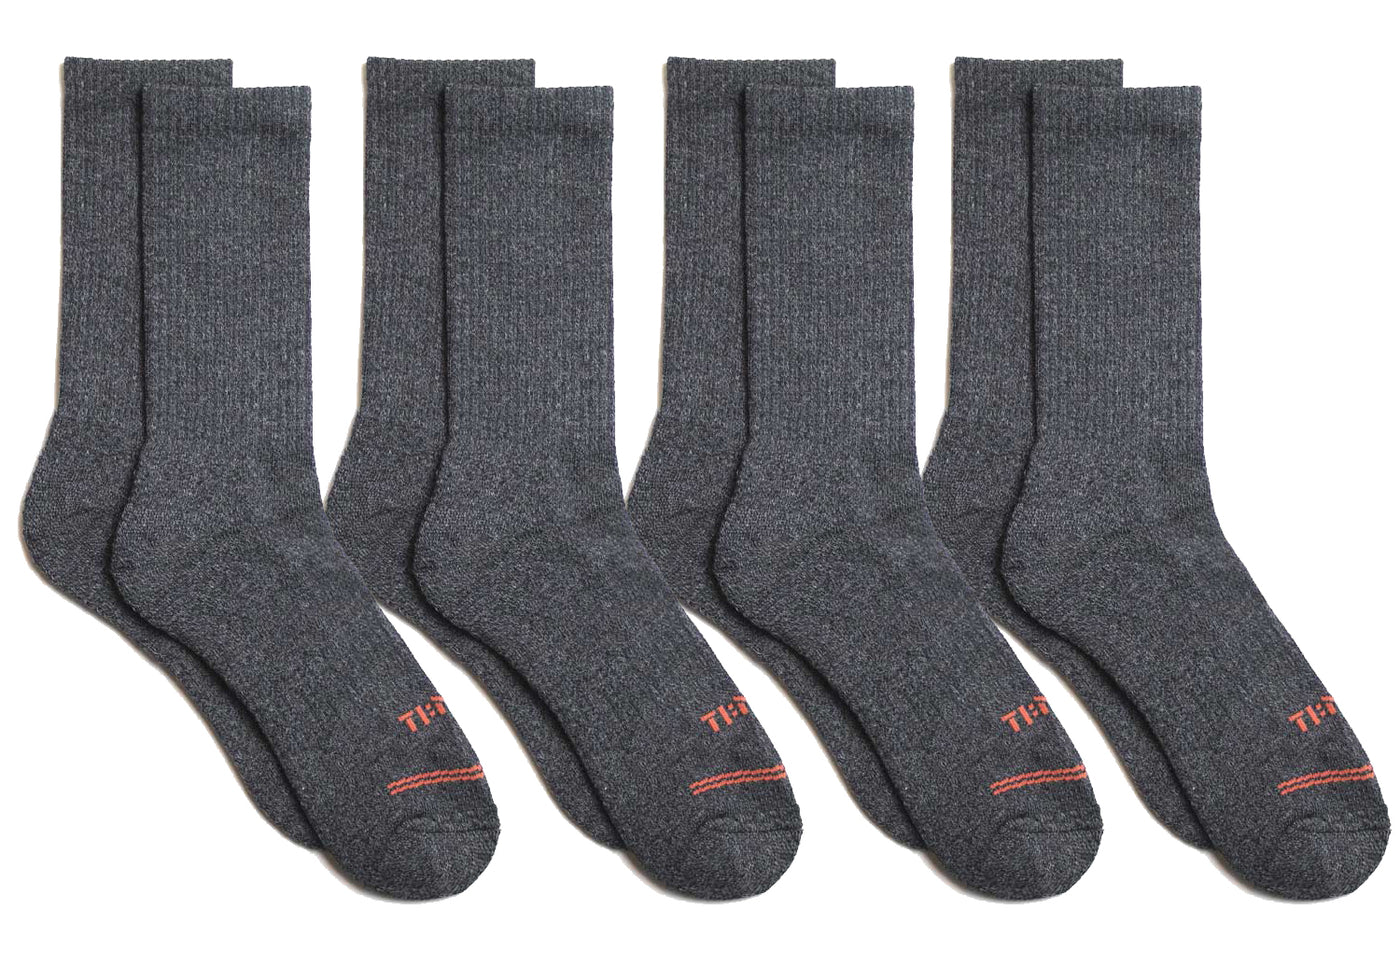 TIME Comfort Socks (unisex) - Calf Socks - 4 Pack / Small by TIME Slippers